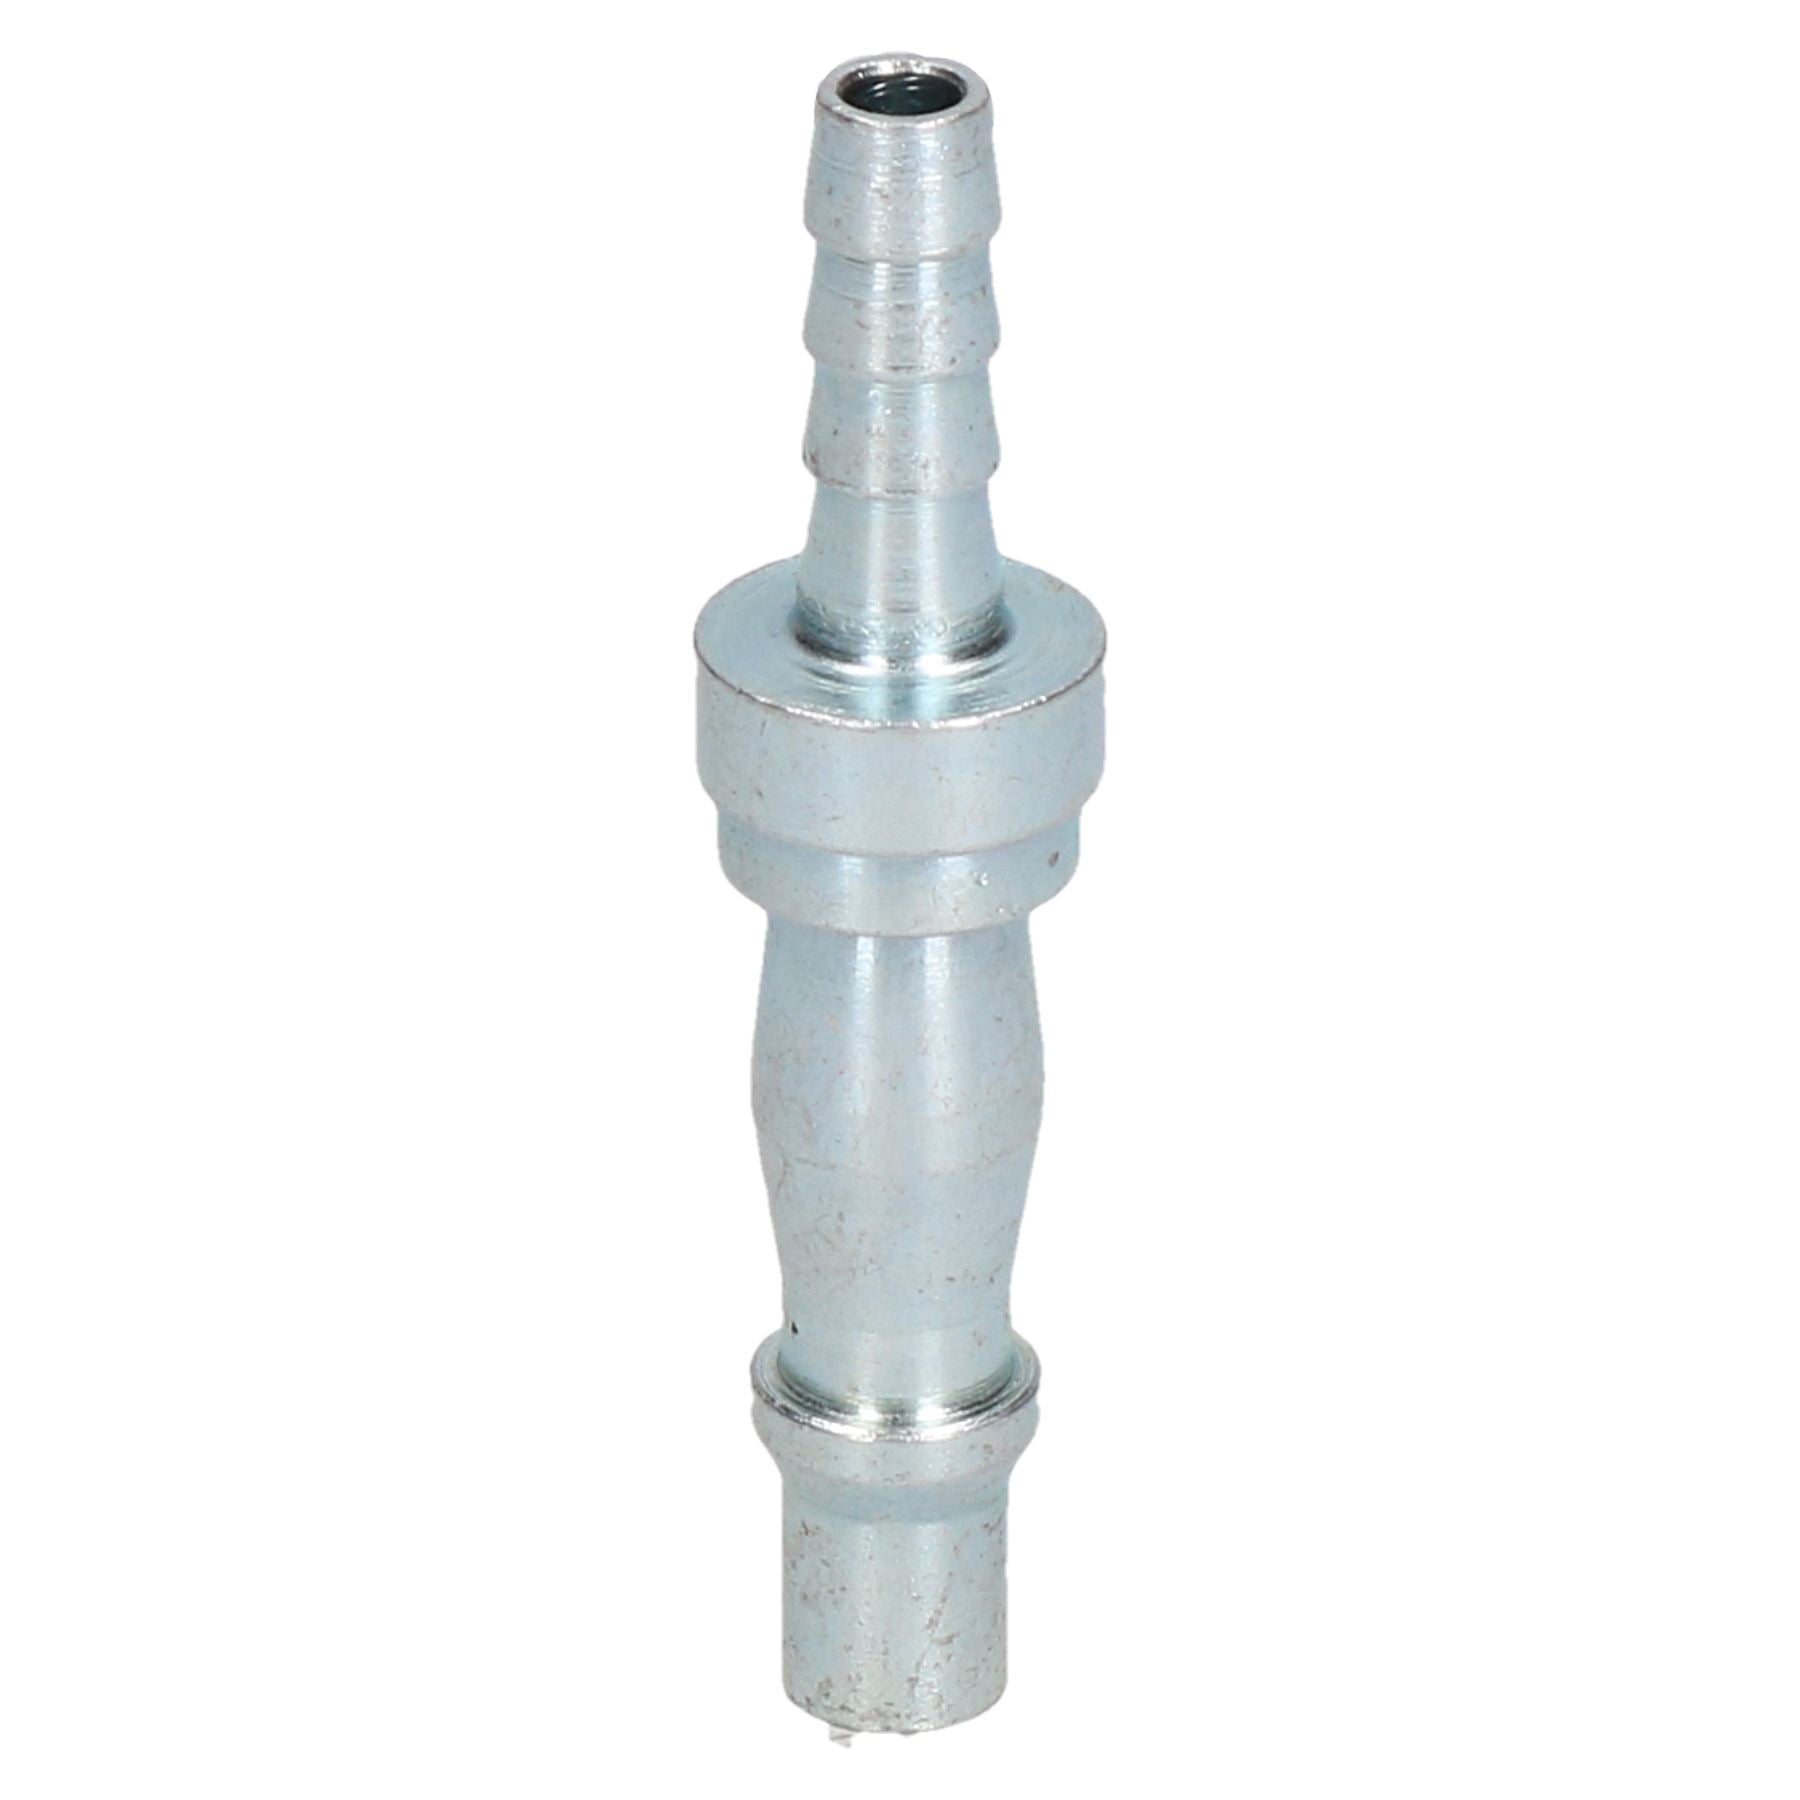 PCL Airflow Male Adaptor Plug 6.35mm (1/4") Hose Tail Barb Air Hose Connector